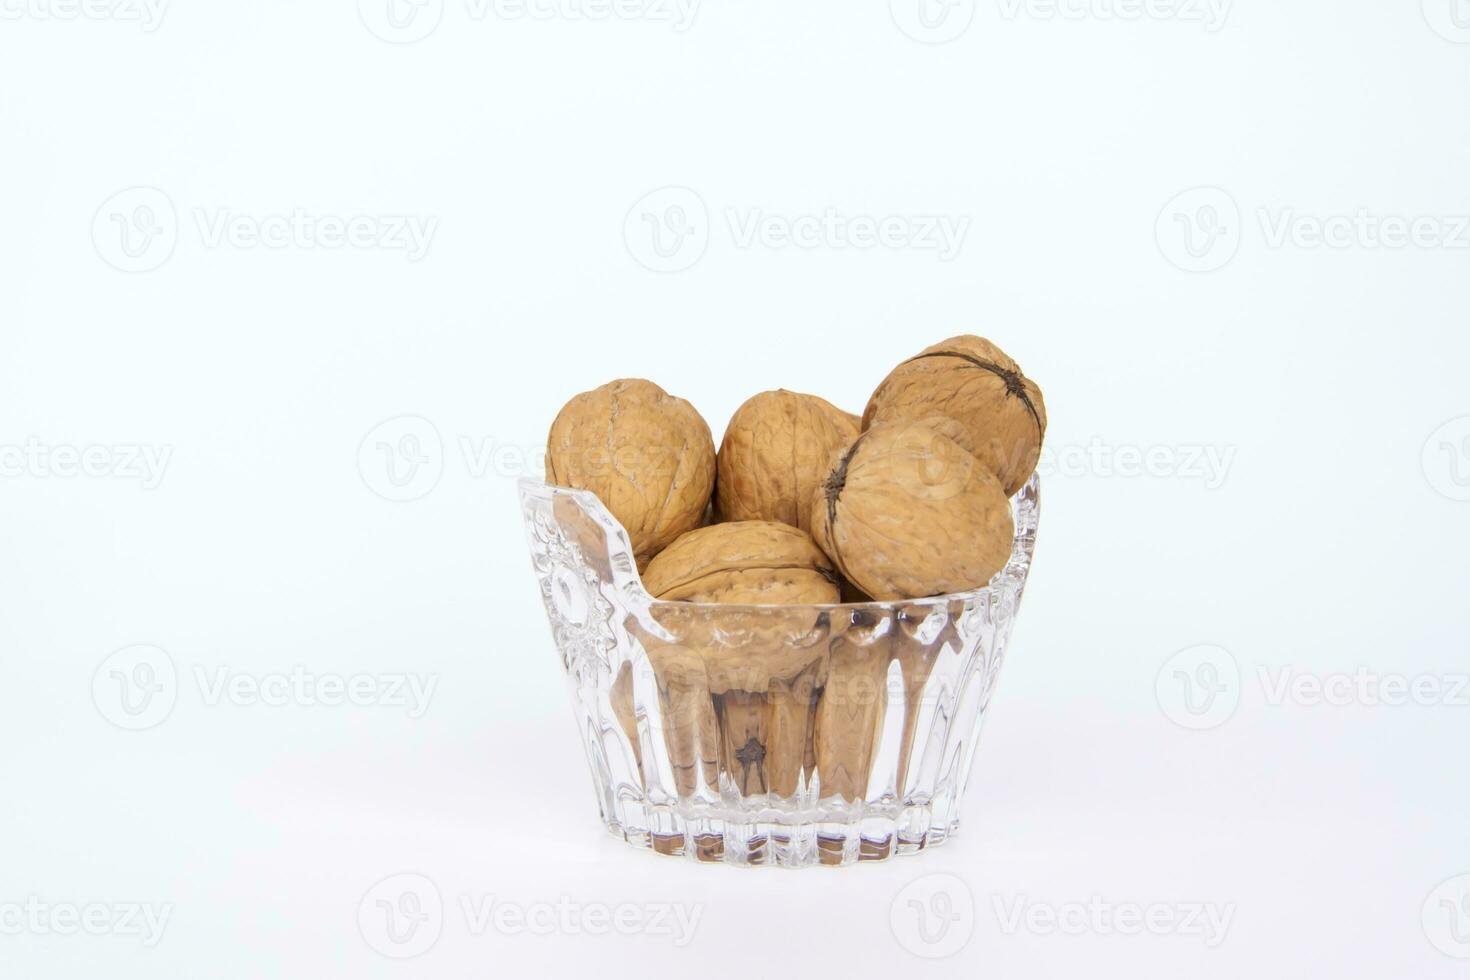 Walnuts in a shell on a white background in a crystal vase. Healthy nuts. photo